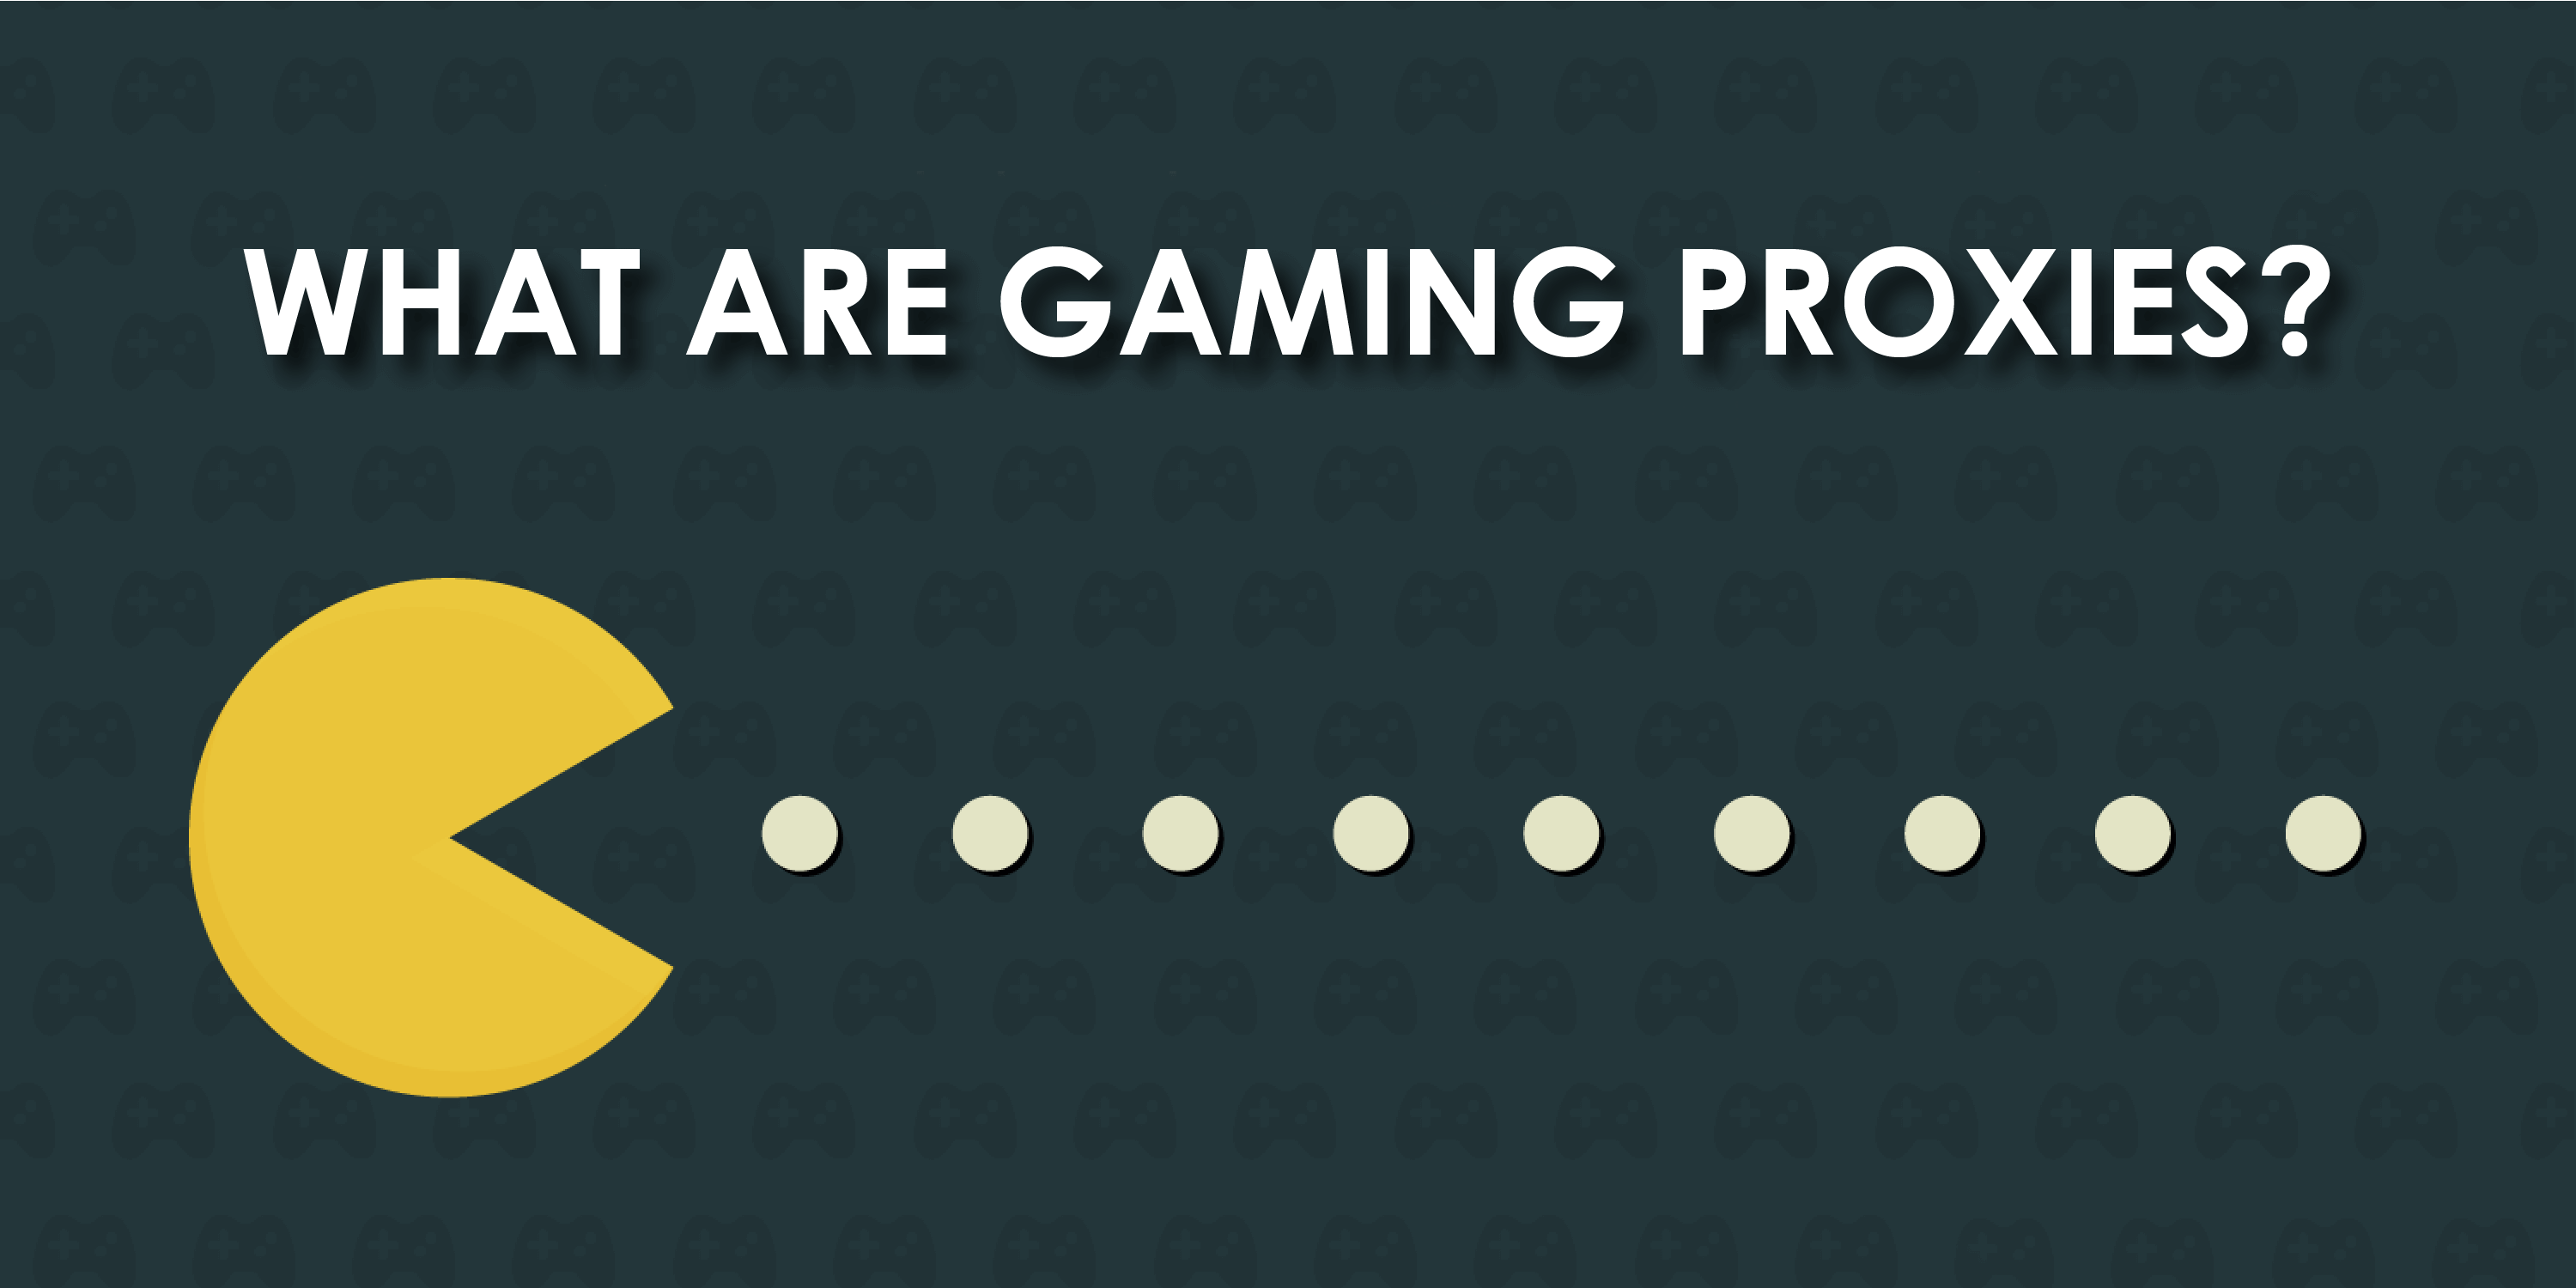 what are \\\[gaming proxies](https://limeproxies.netlify.com/blog/the-ultimate-guide-to-buy-private-proxies/)?